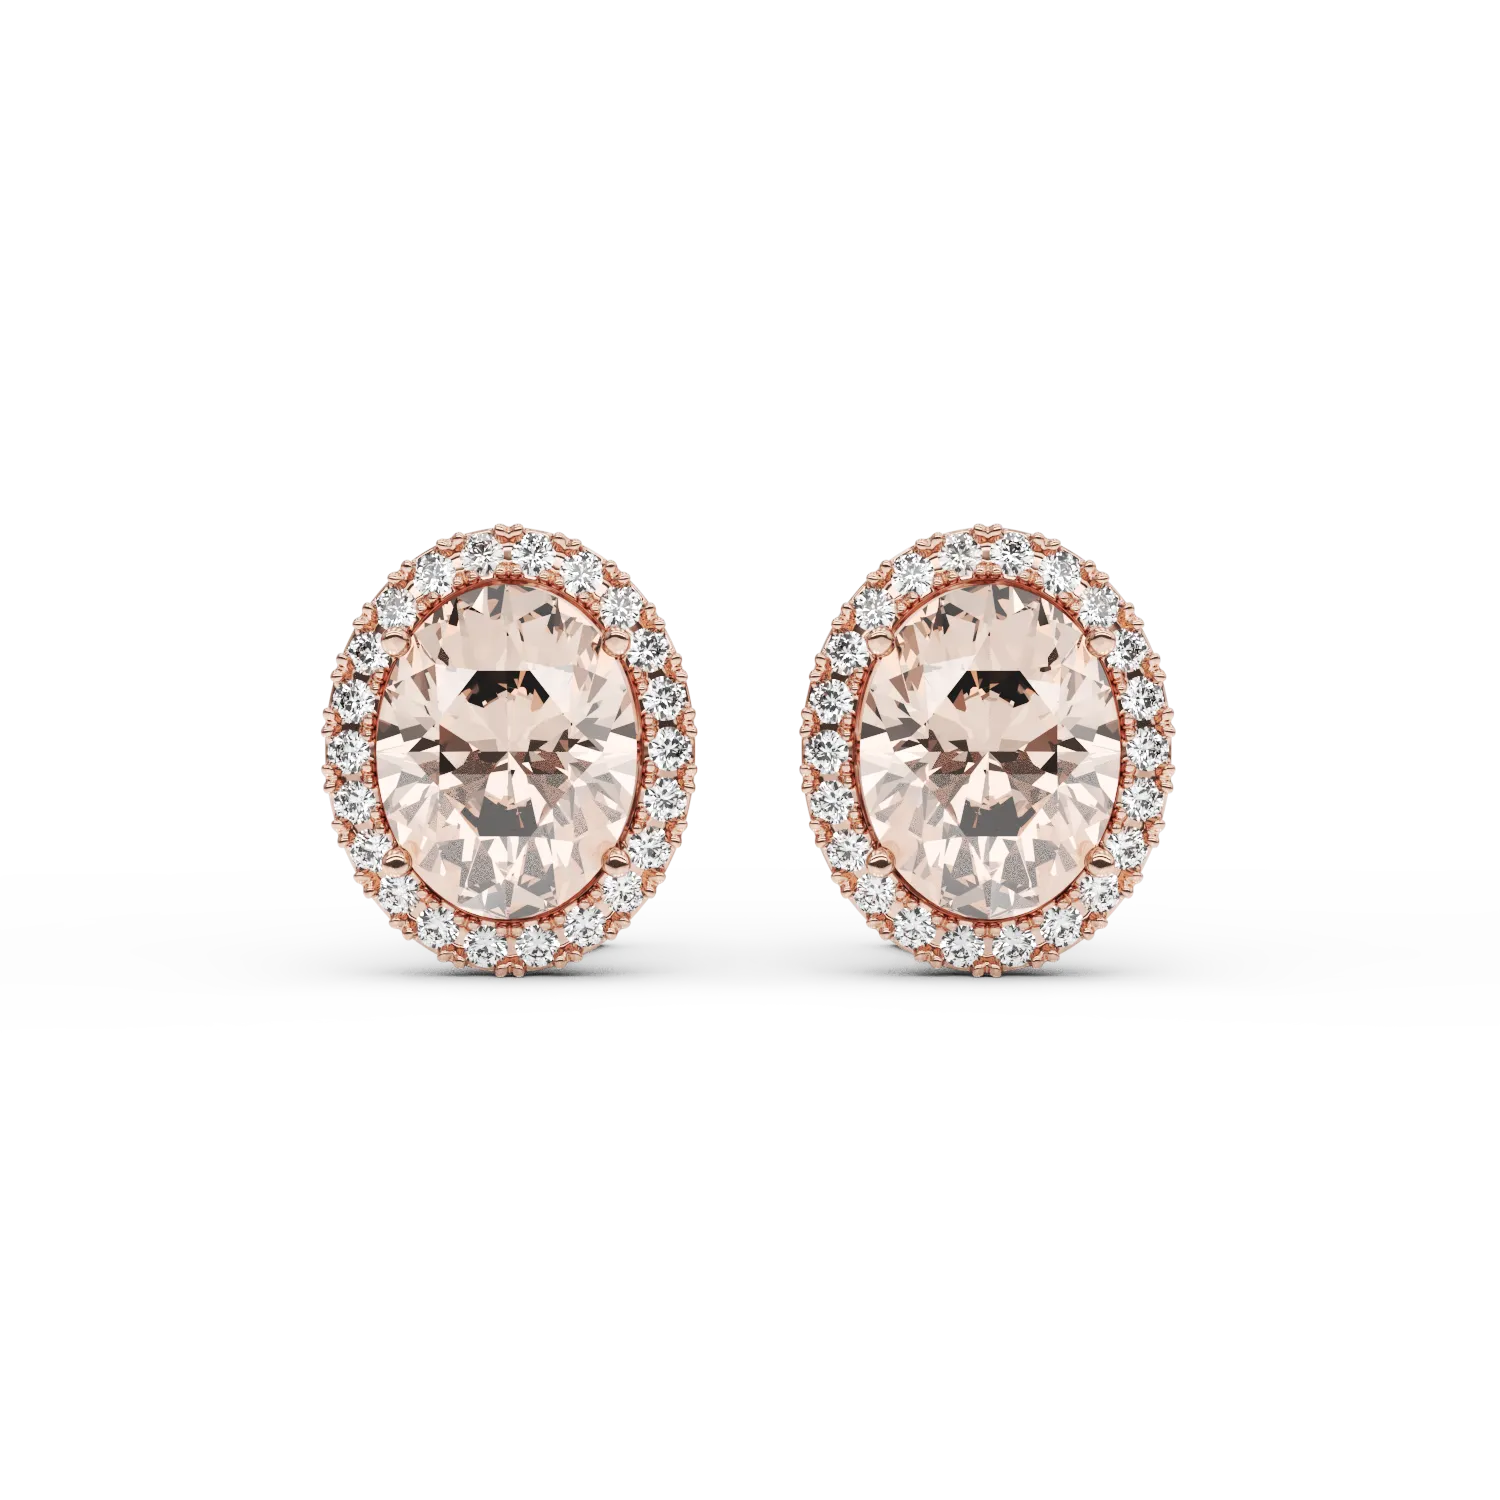 18K rose gold earrings with 4ct morganites and 0.3ct diamonds